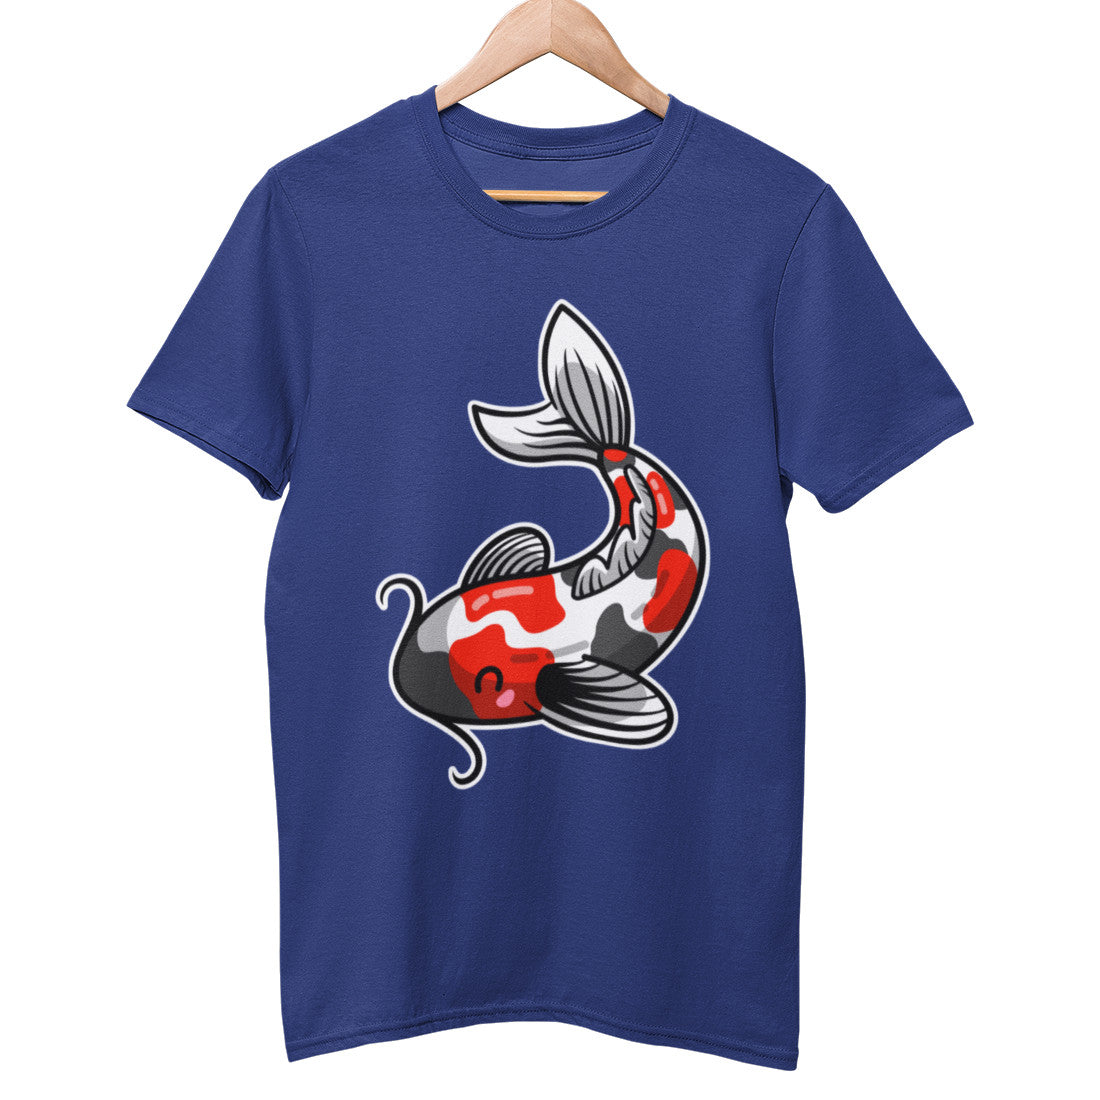 A blue colour unisex crewneck t-shirt on a hanger with a design on its chest of a kawaii cute orange, white and black koi carp fish with its tail at the top and curving round and down to the left to its face looking left